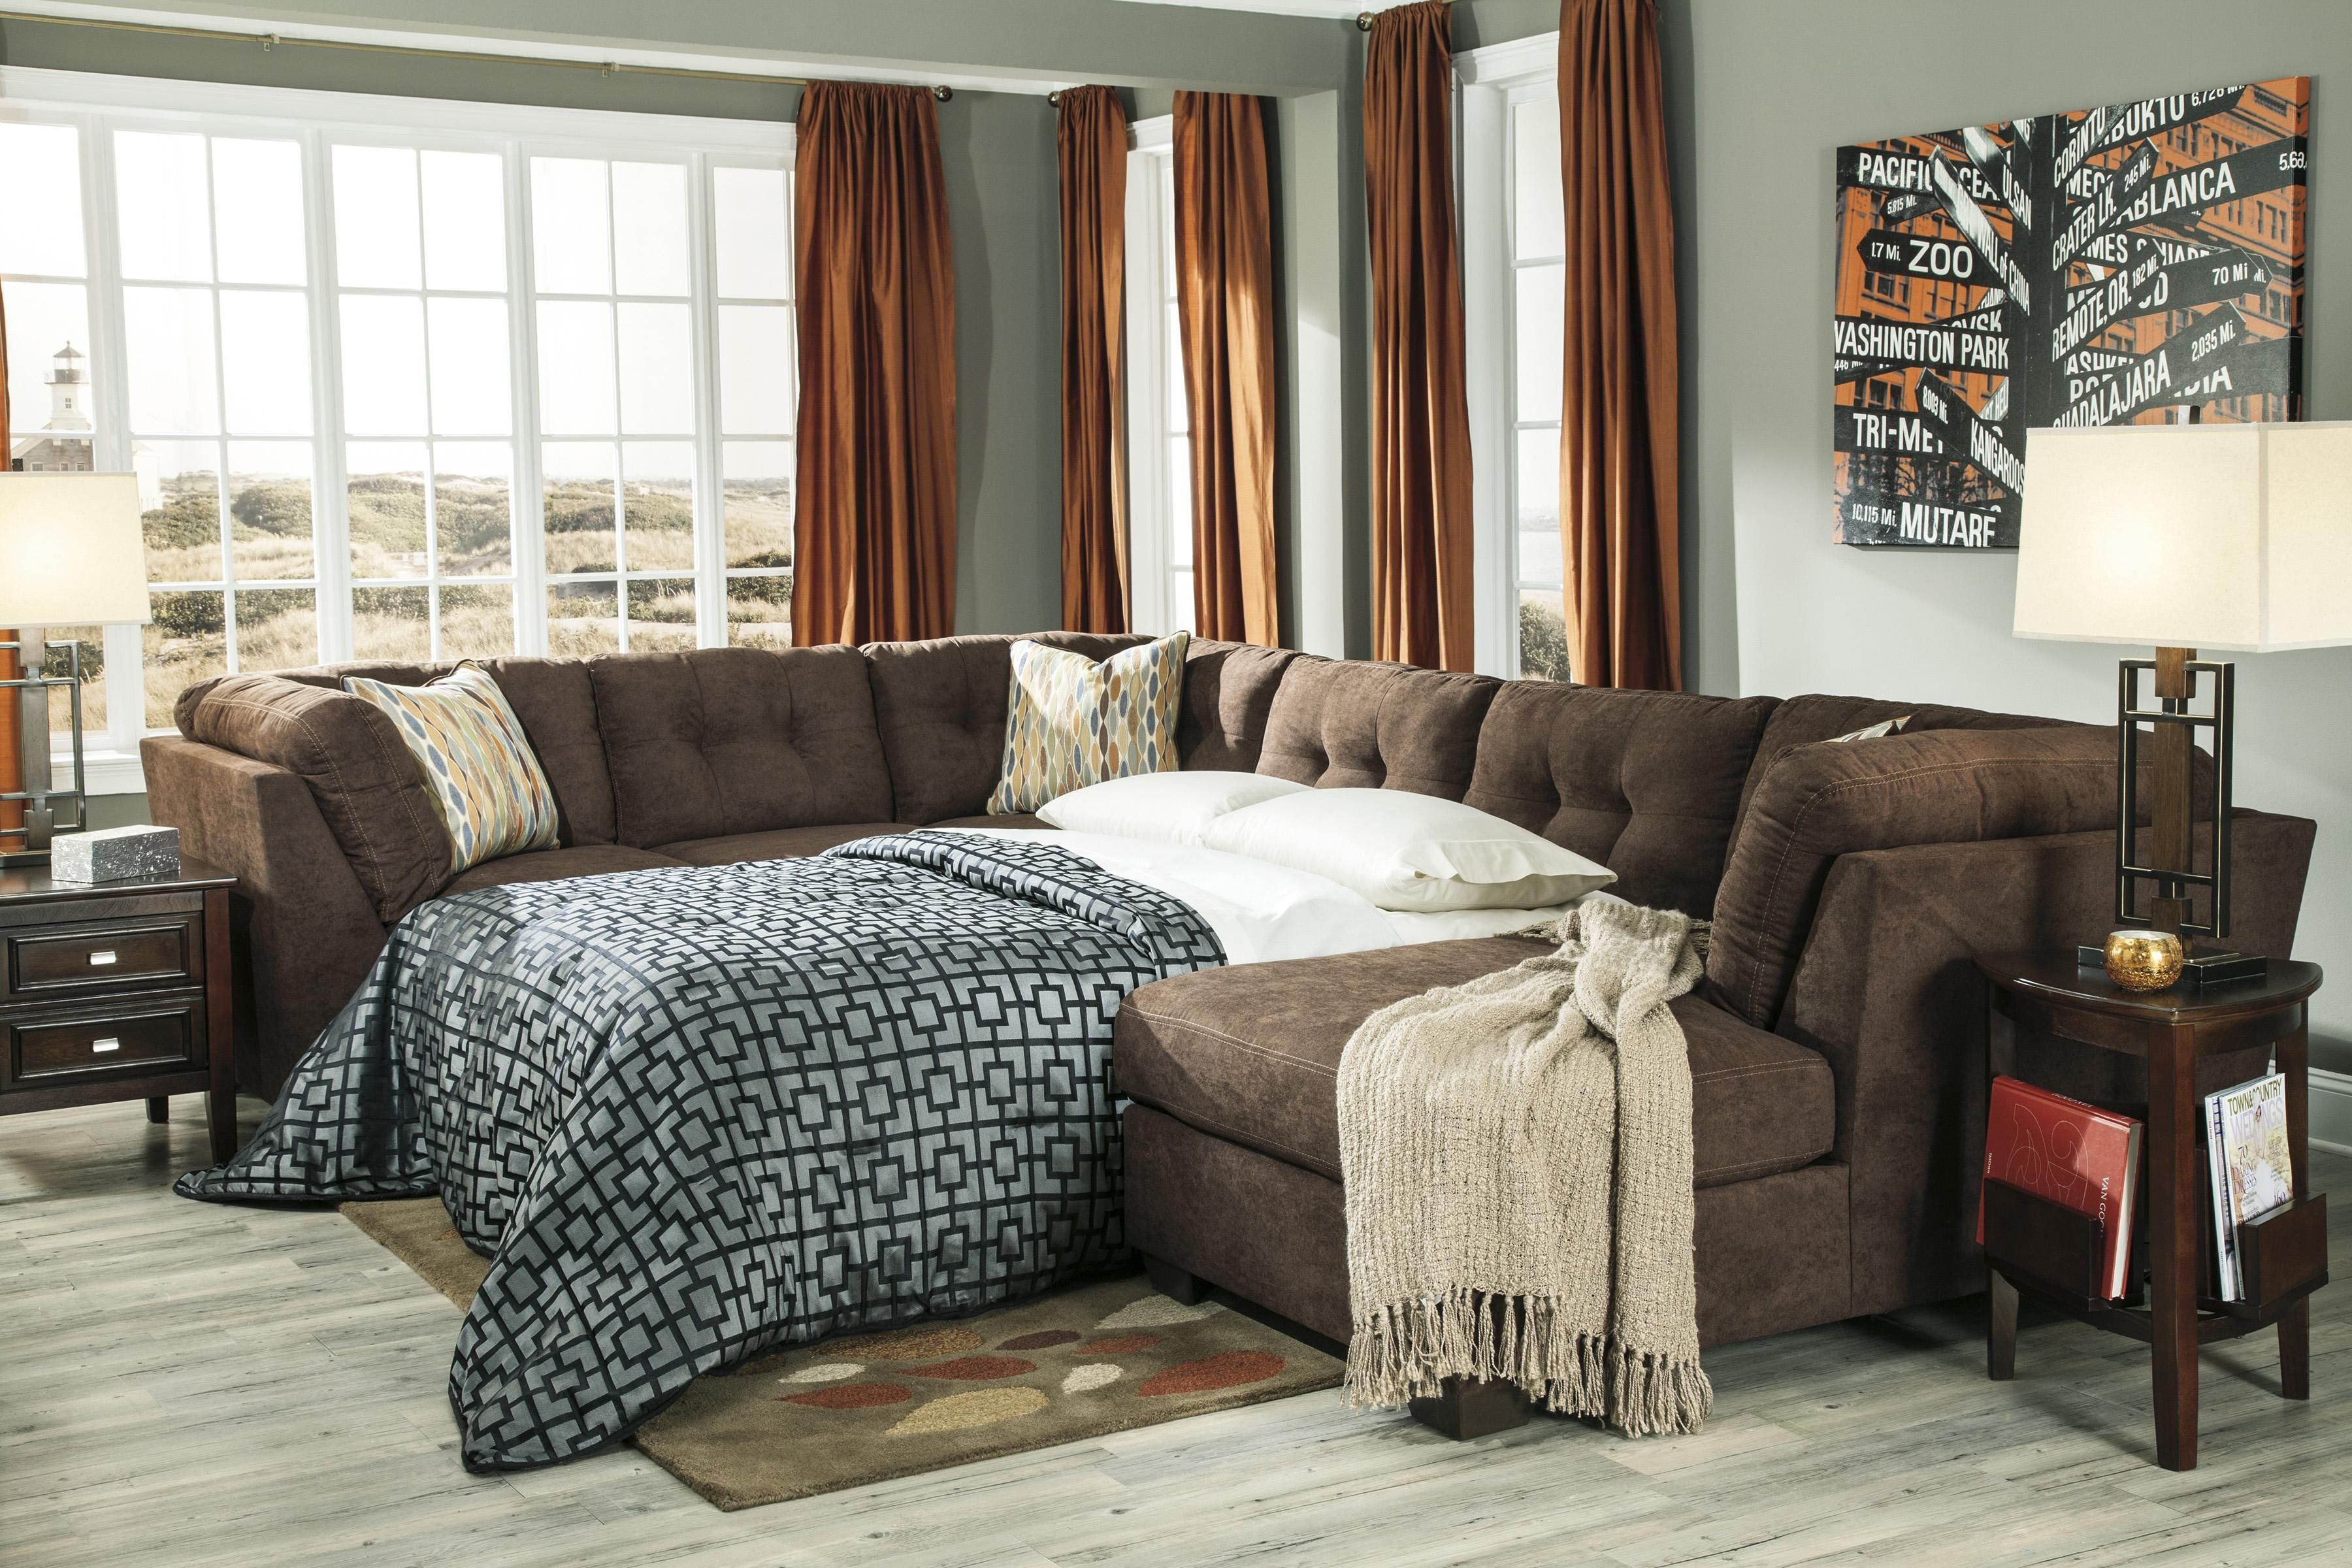 Furniture Wondrous Alluring Sectional With Sleeper For Home Within 3 Piece Sectional Sleeper Sofa (View 12 of 12)